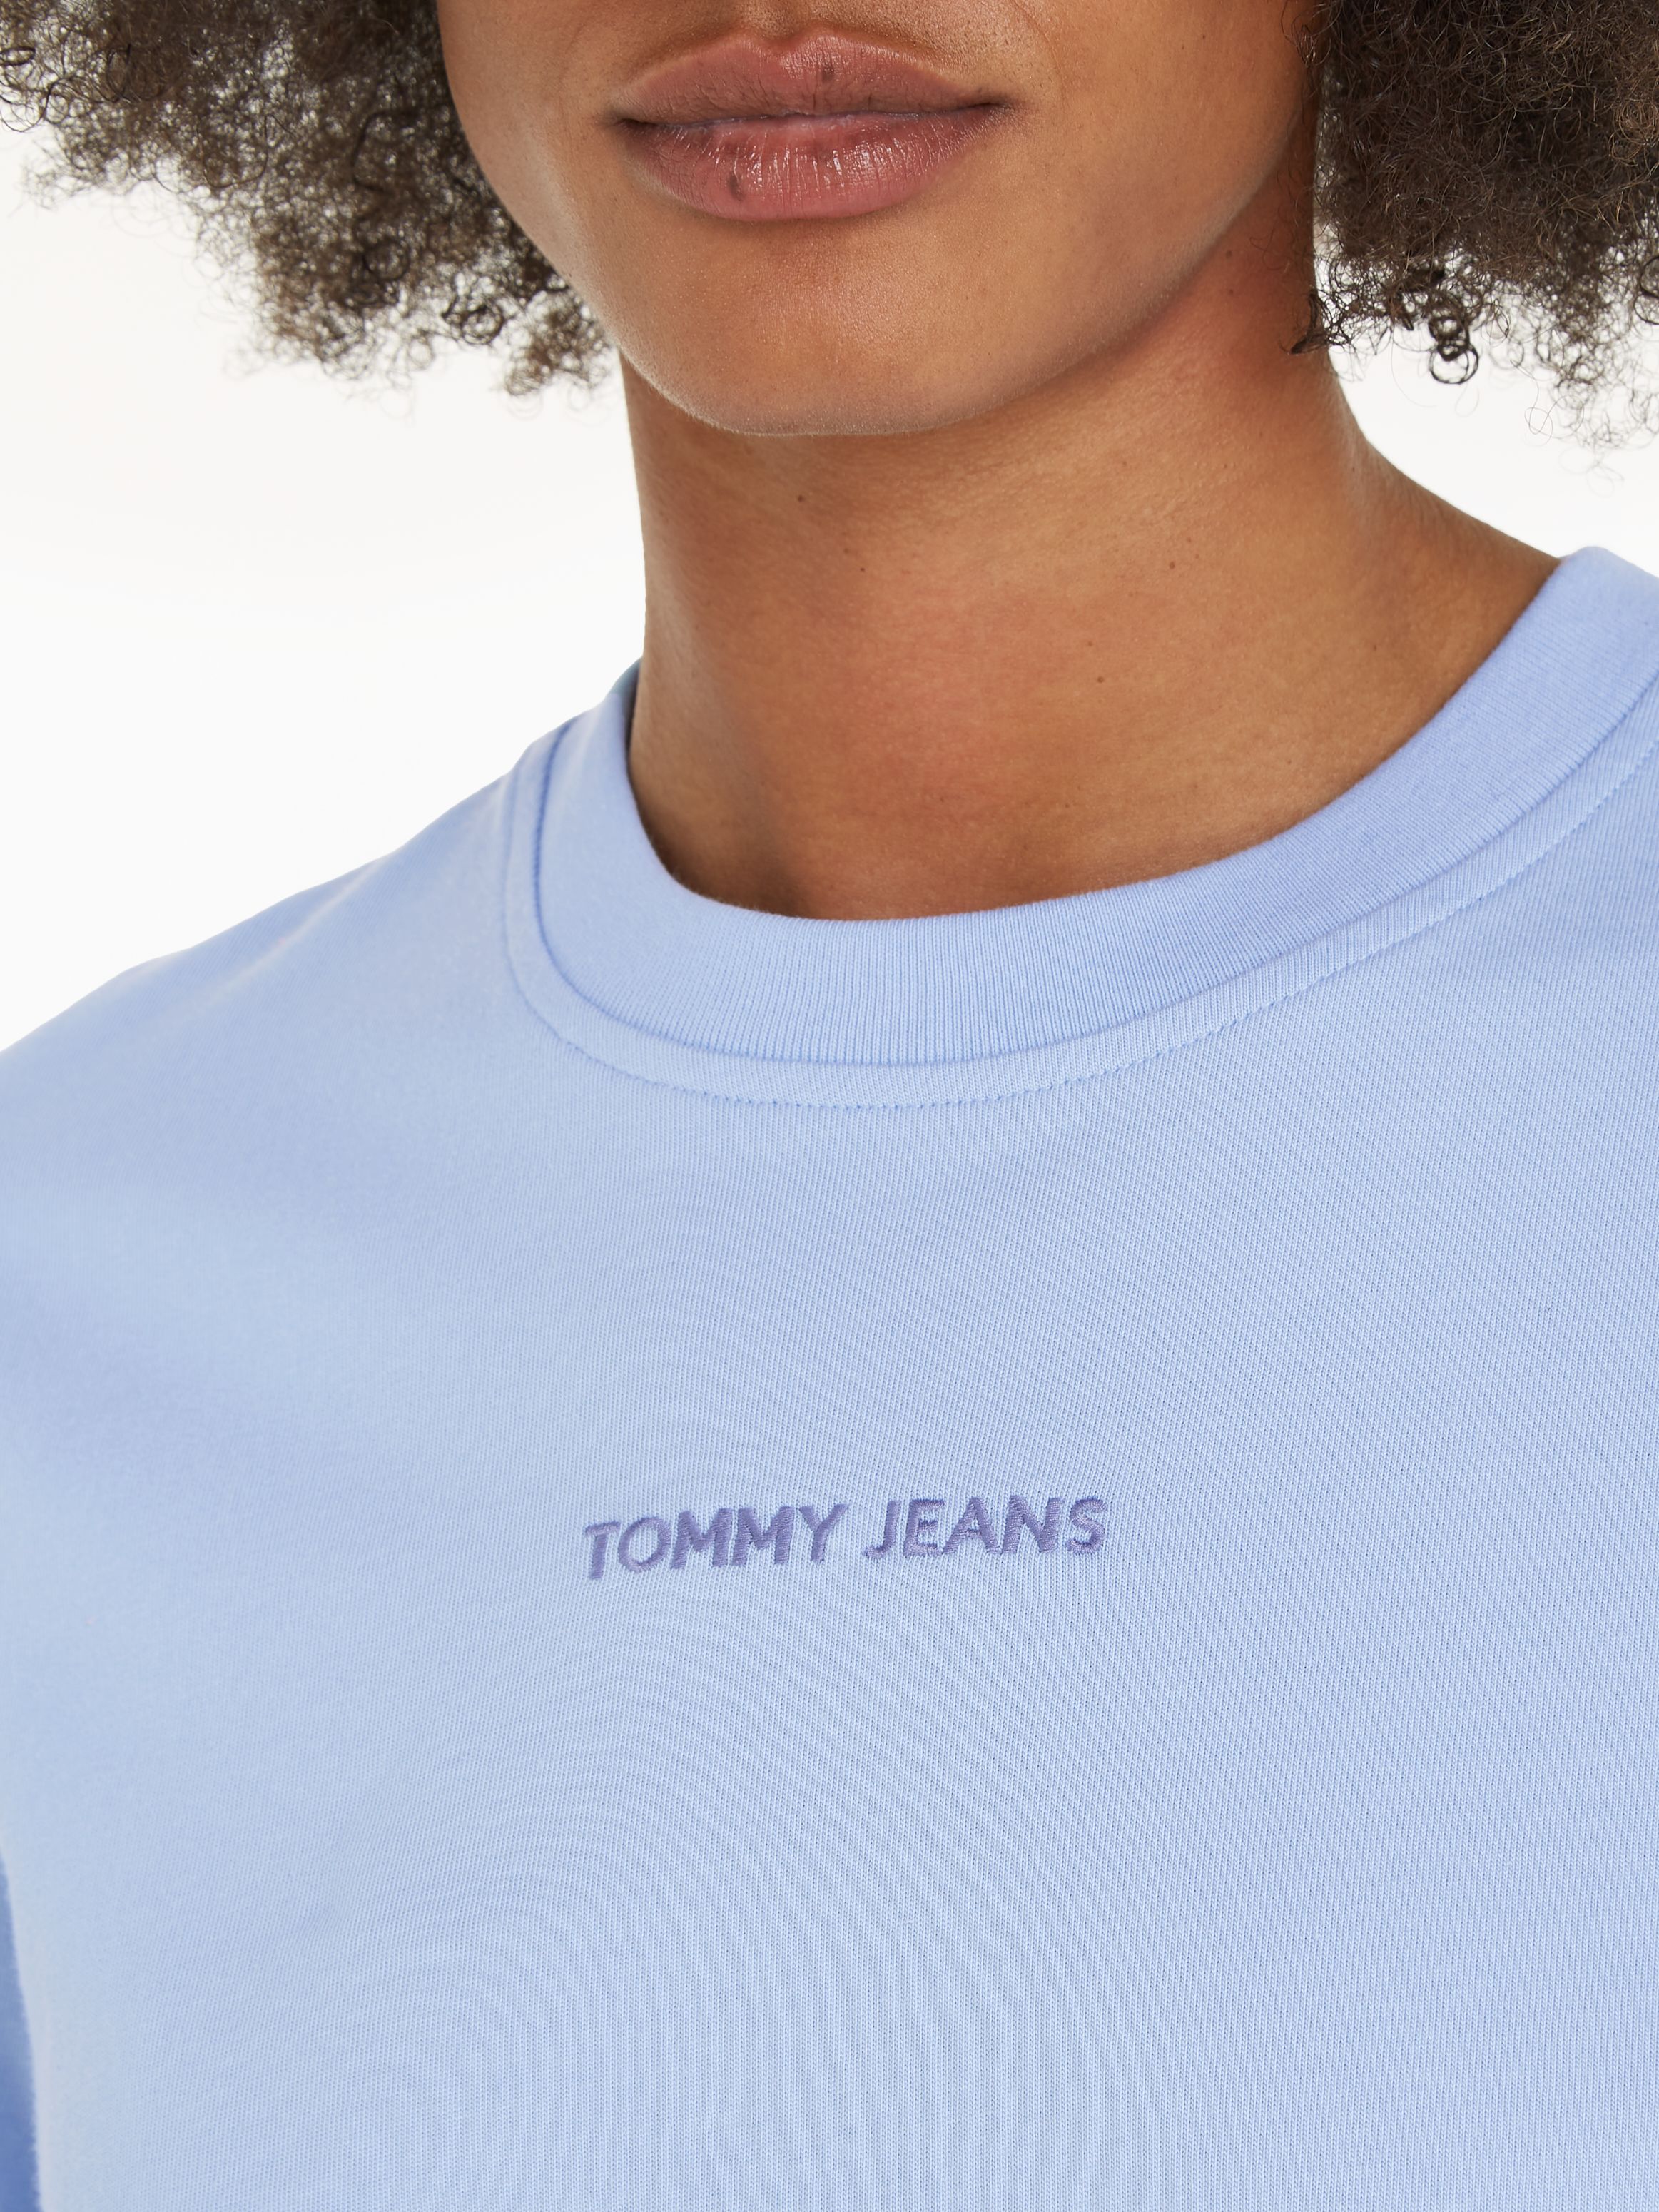 Tommy Jeans New Classic Tee